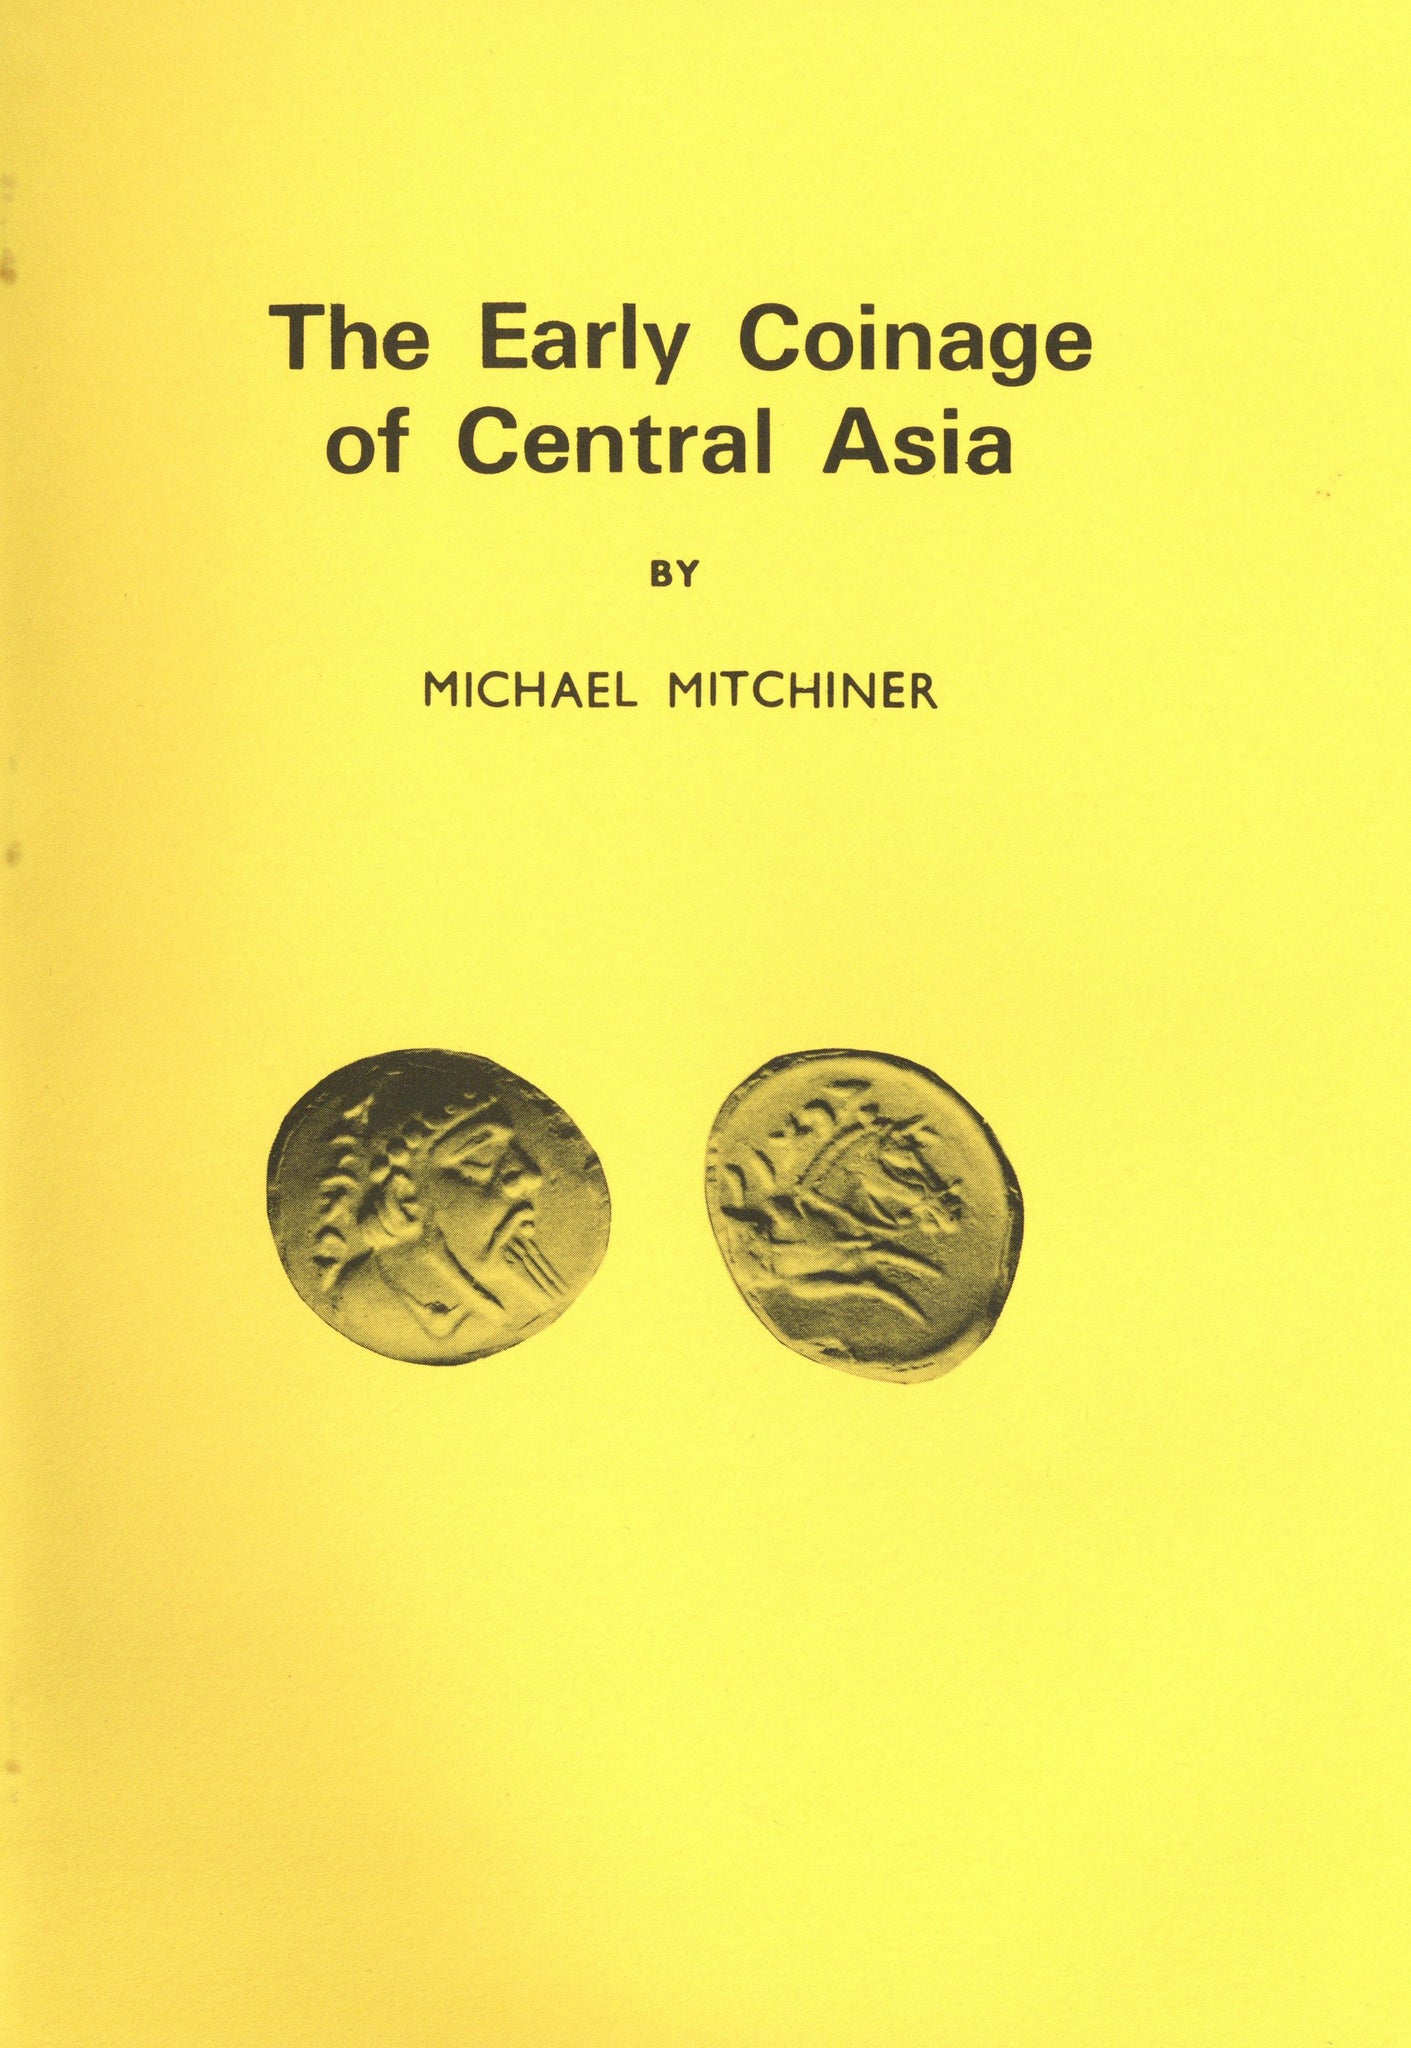 The Early Coinage of Central Asia by Michael Mitchiner